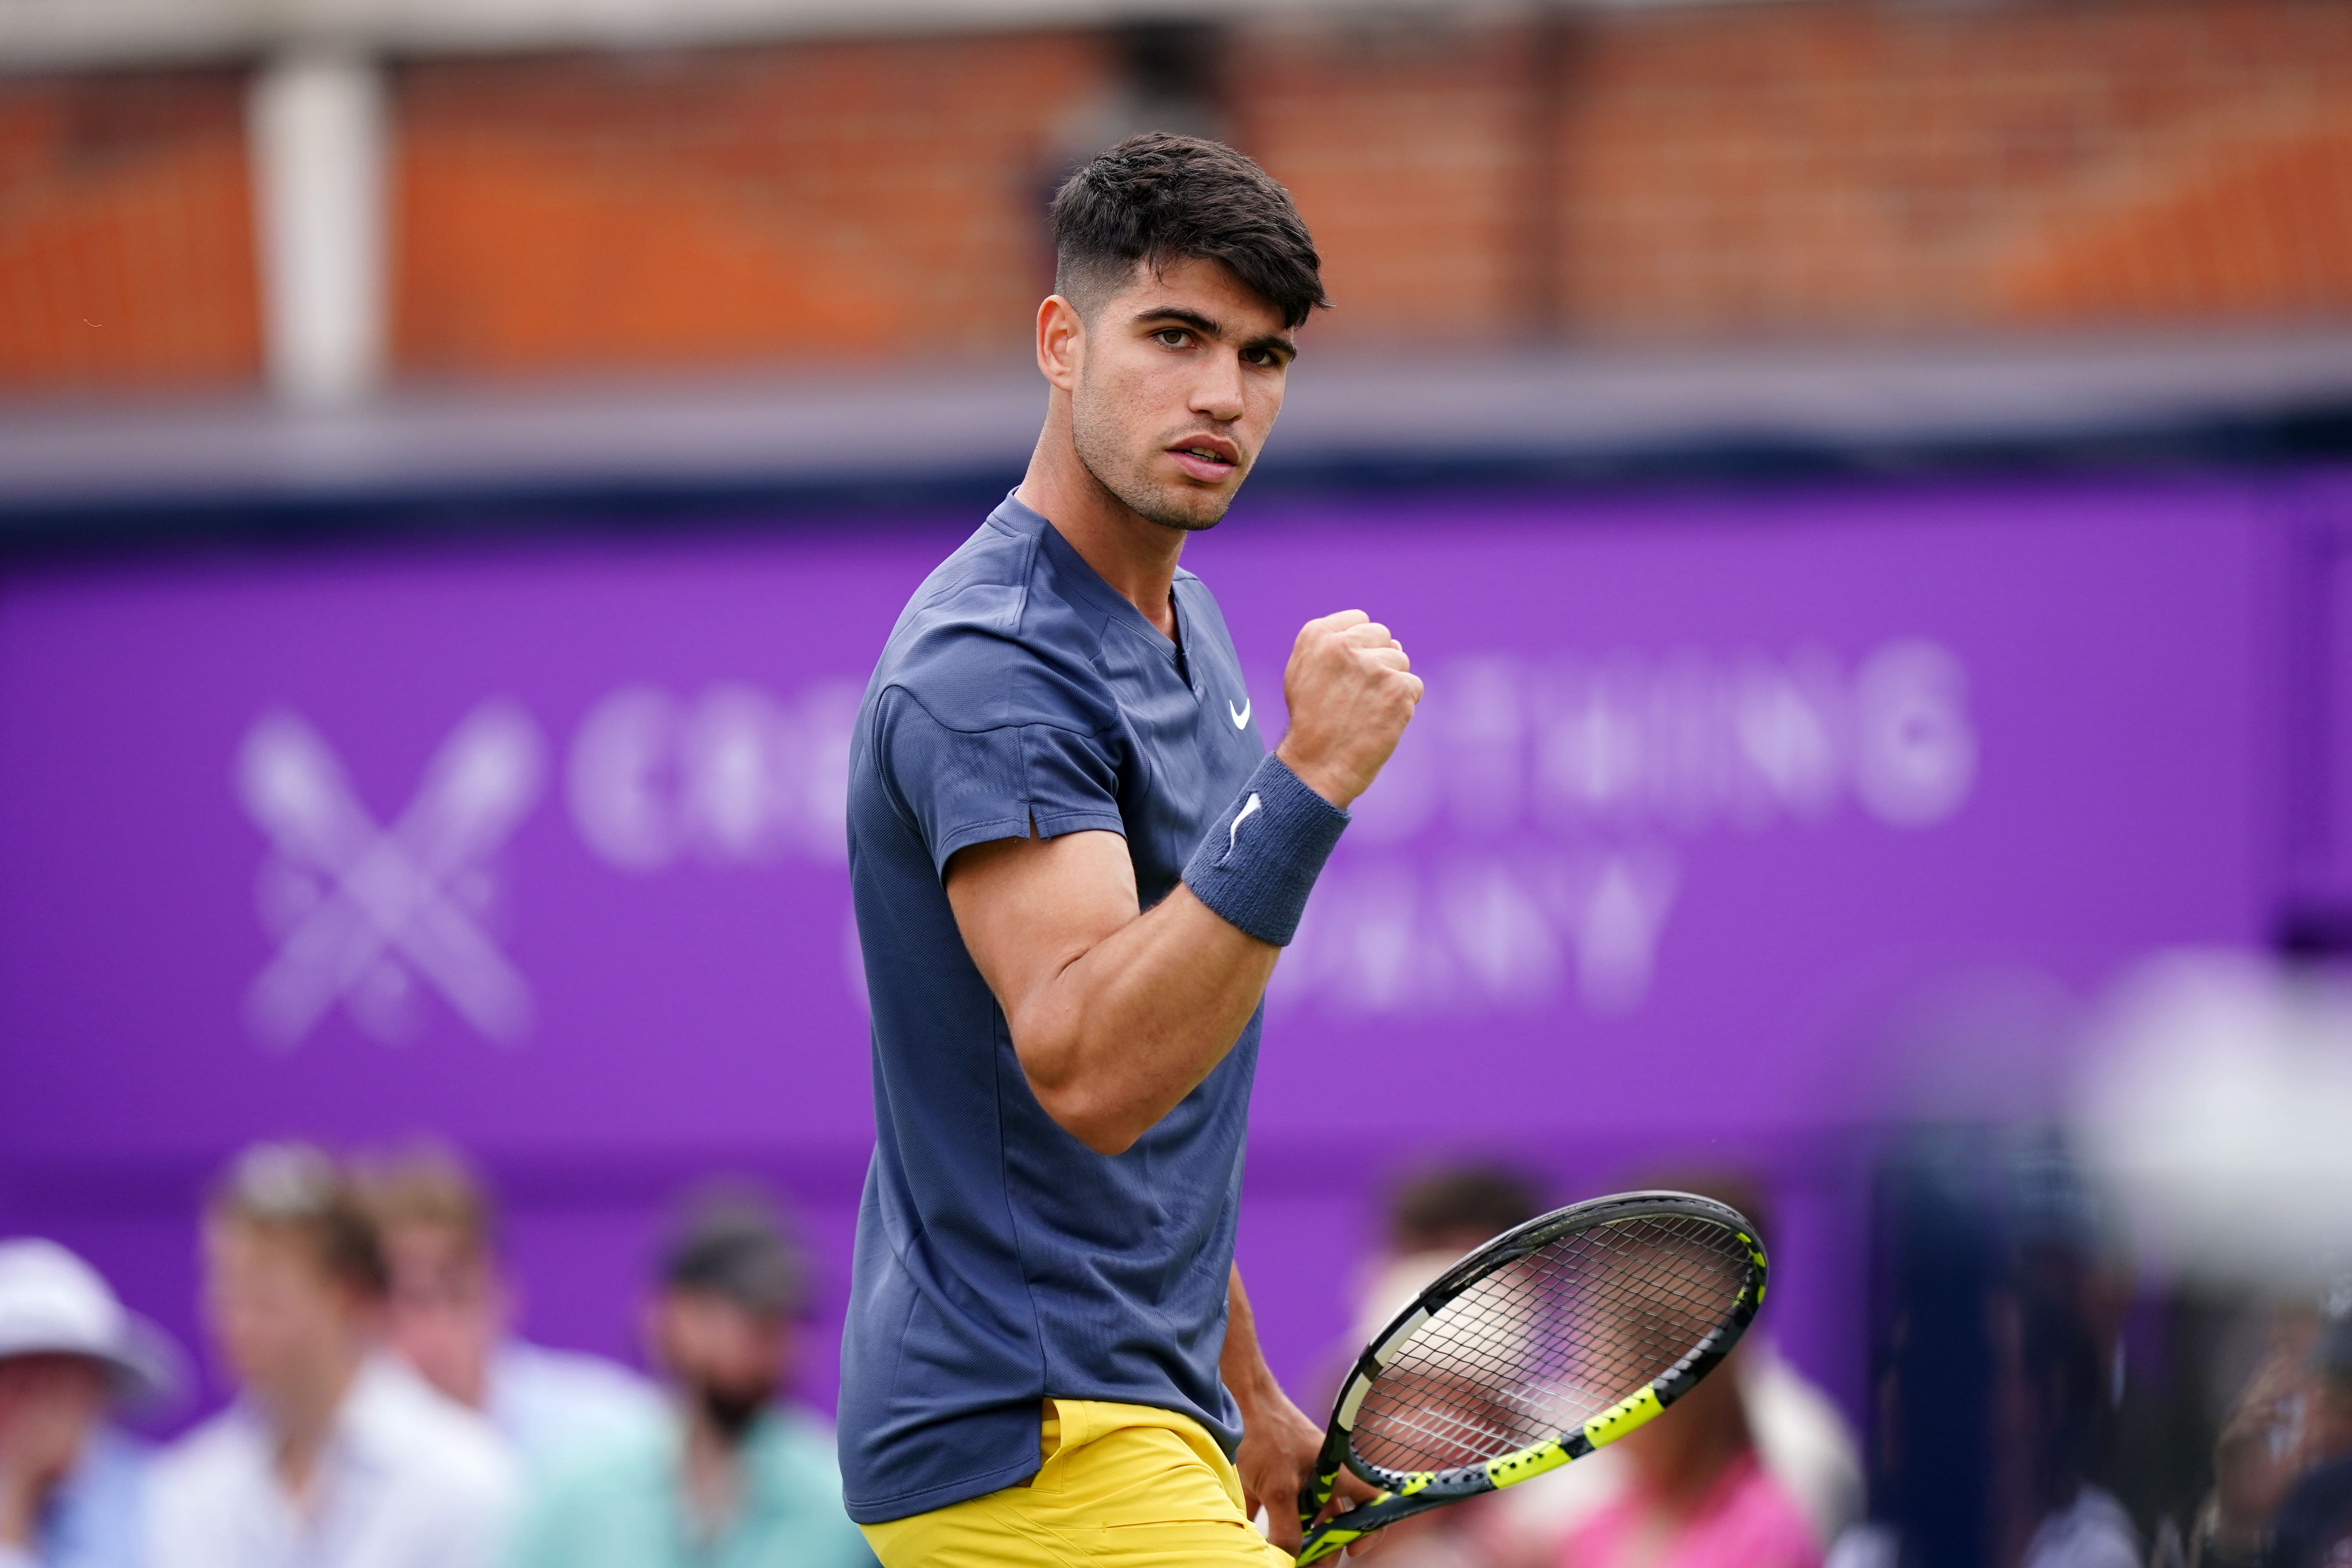 queen's club, wimbledon, carlos alcaraz, jack draper, andy murray, how to, what time is carlos alcaraz vs jack draper? queen’s day 4 order of play and how to watch on tv